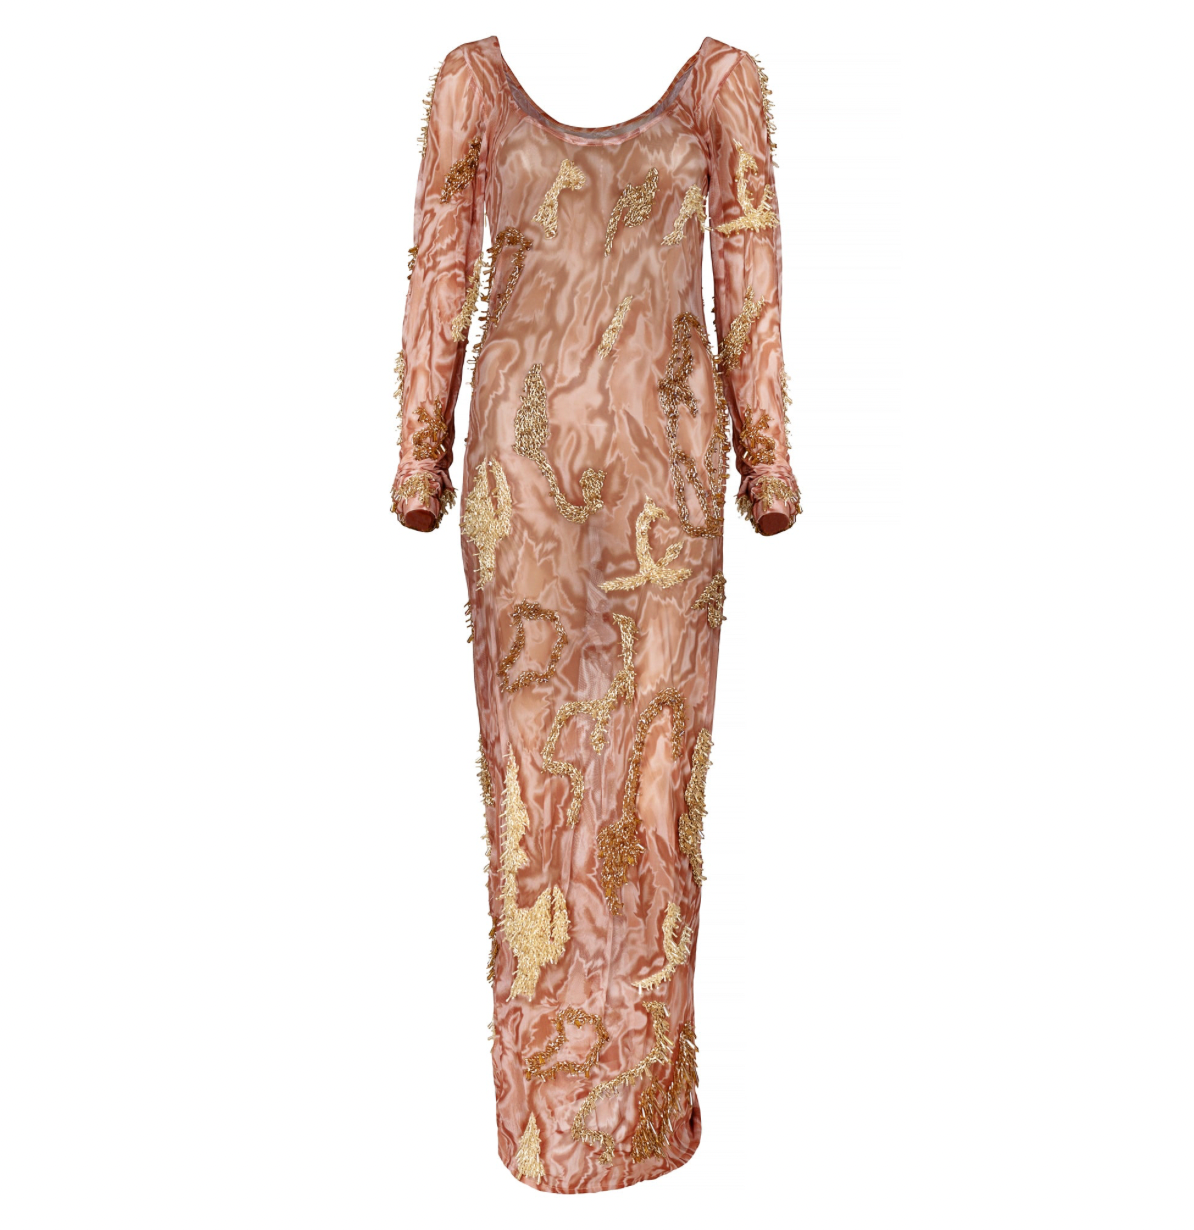 Mesh long sleeved, scooped neck, mini dress in nude color with gold beading pattern for women